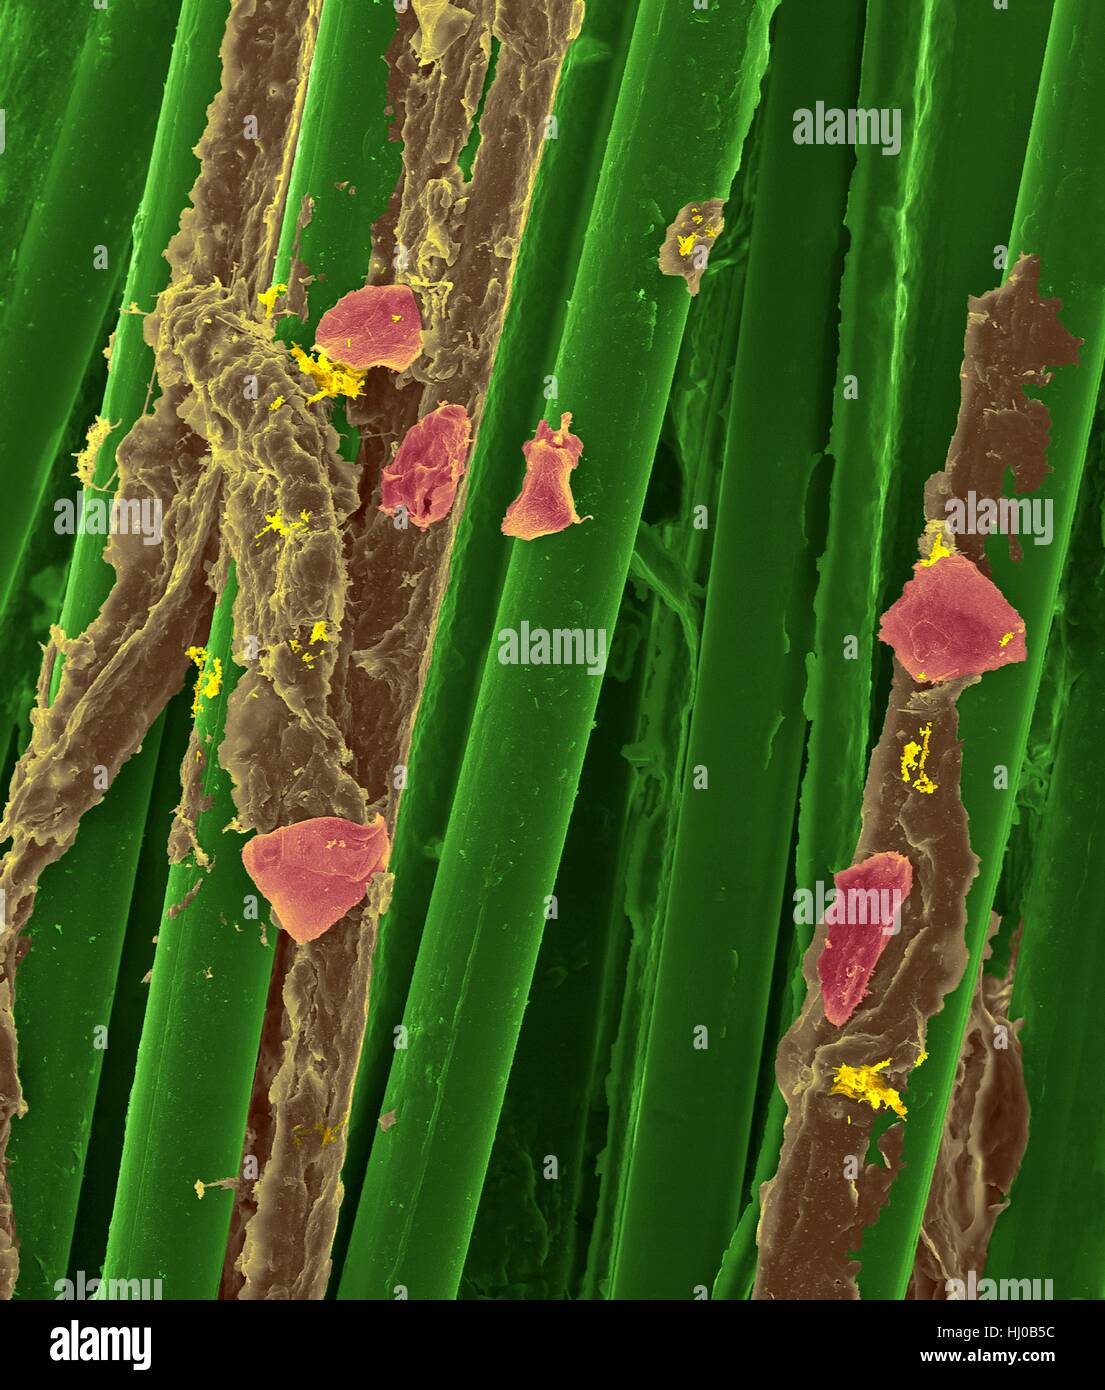 Used wax dental floss with dental plaque (brown),bacteria (yellow) cheek cells (purple) on dental floss fibres (green),coloured scanning electron micrograph (SEM).Plaque consists of biofilm of bacteria embedded in glycoprotein matrix.The matrix is formed from bacterial secretions saliva.The Stock Photo